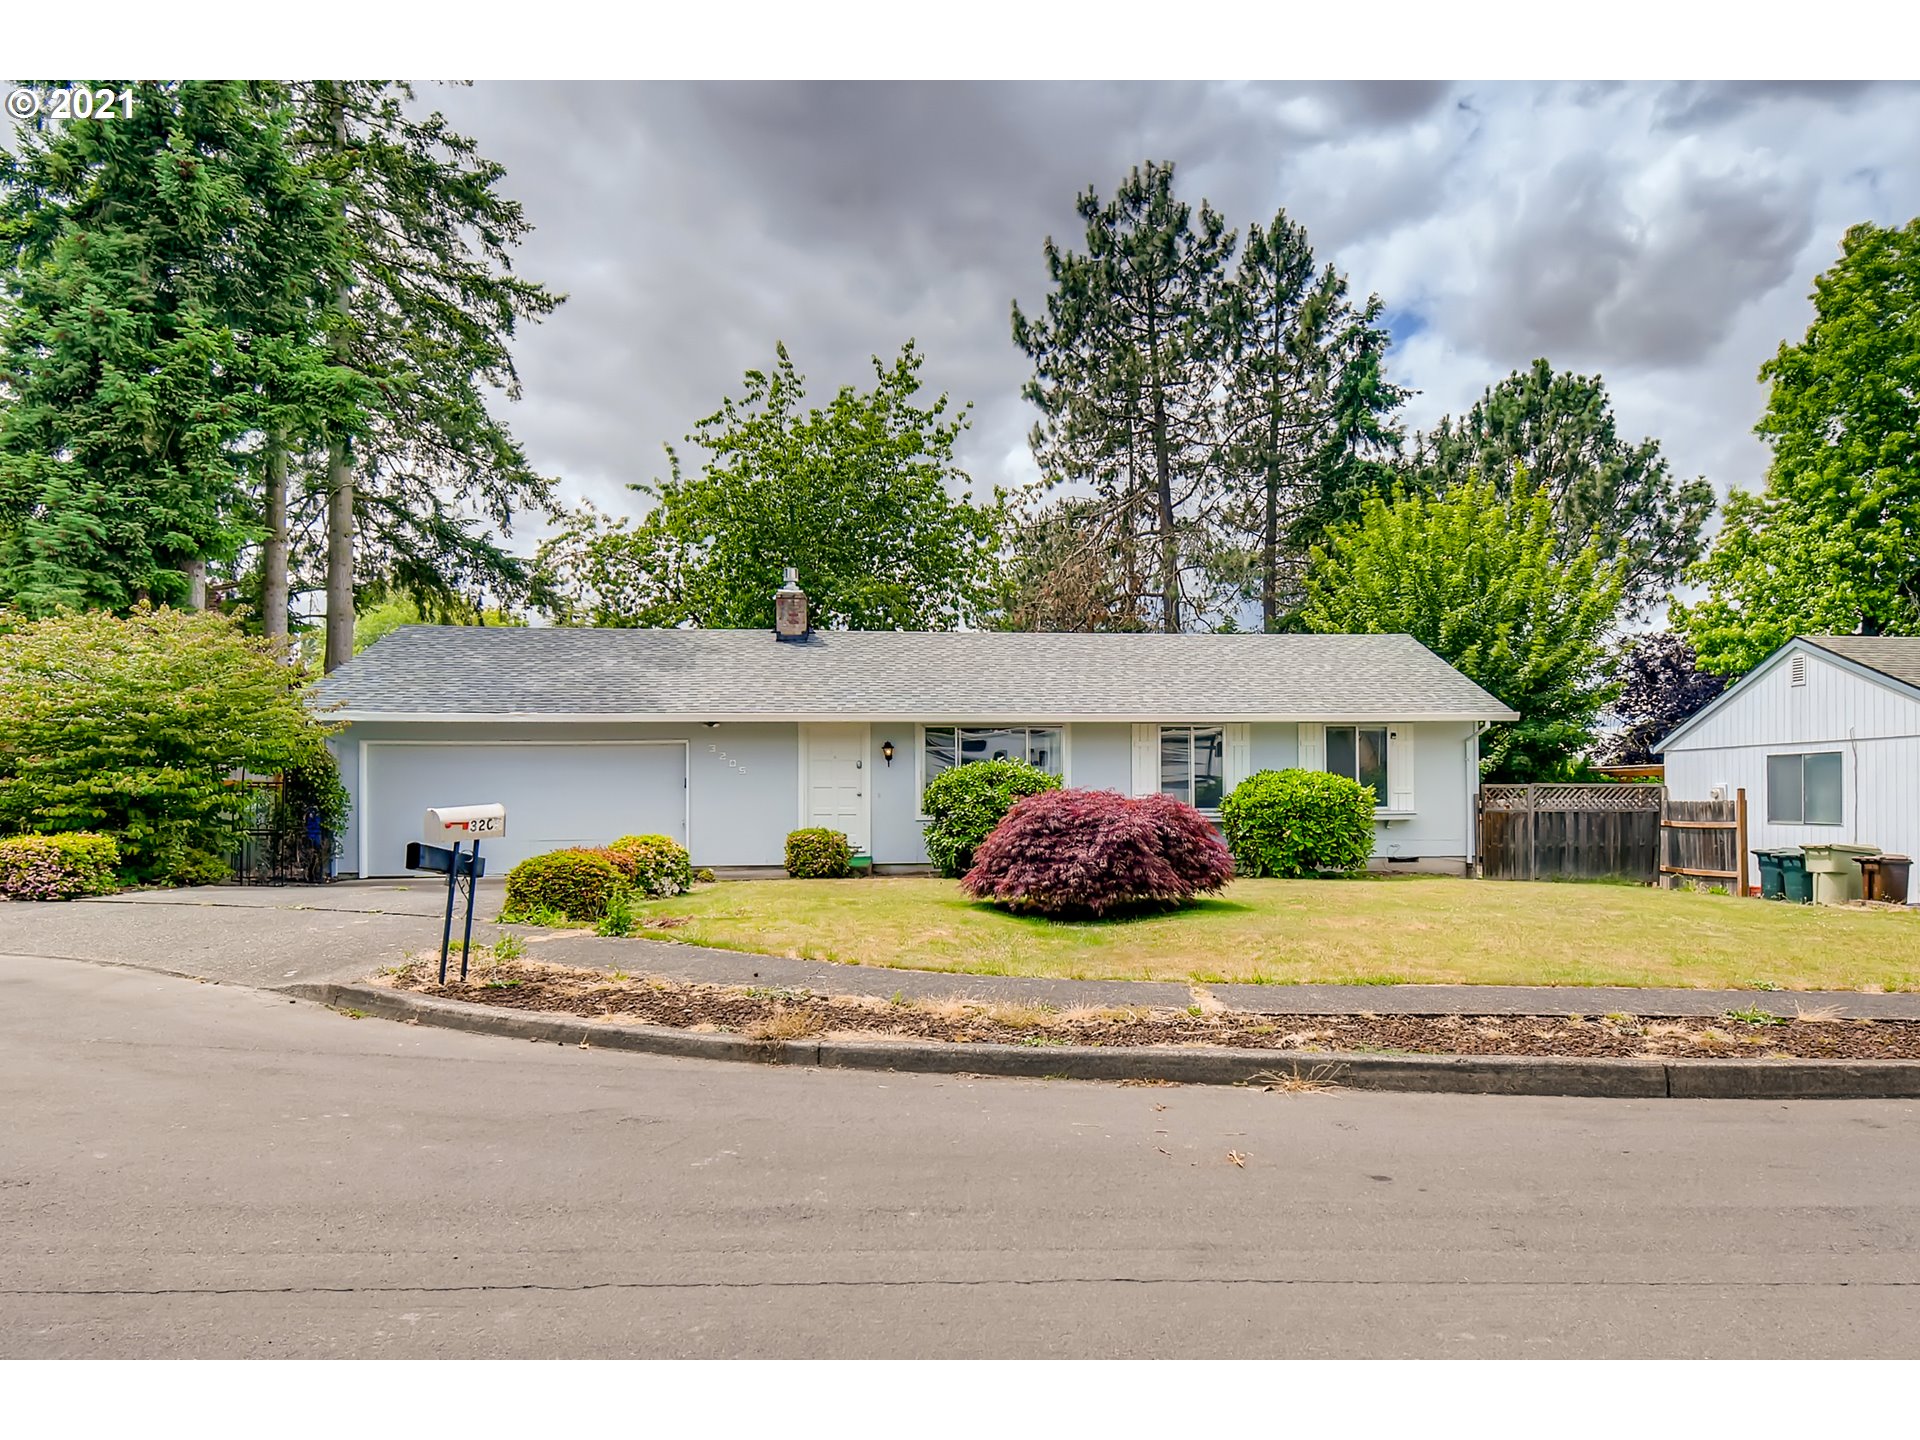 3205 NW 179TH AVE (1 of 32)